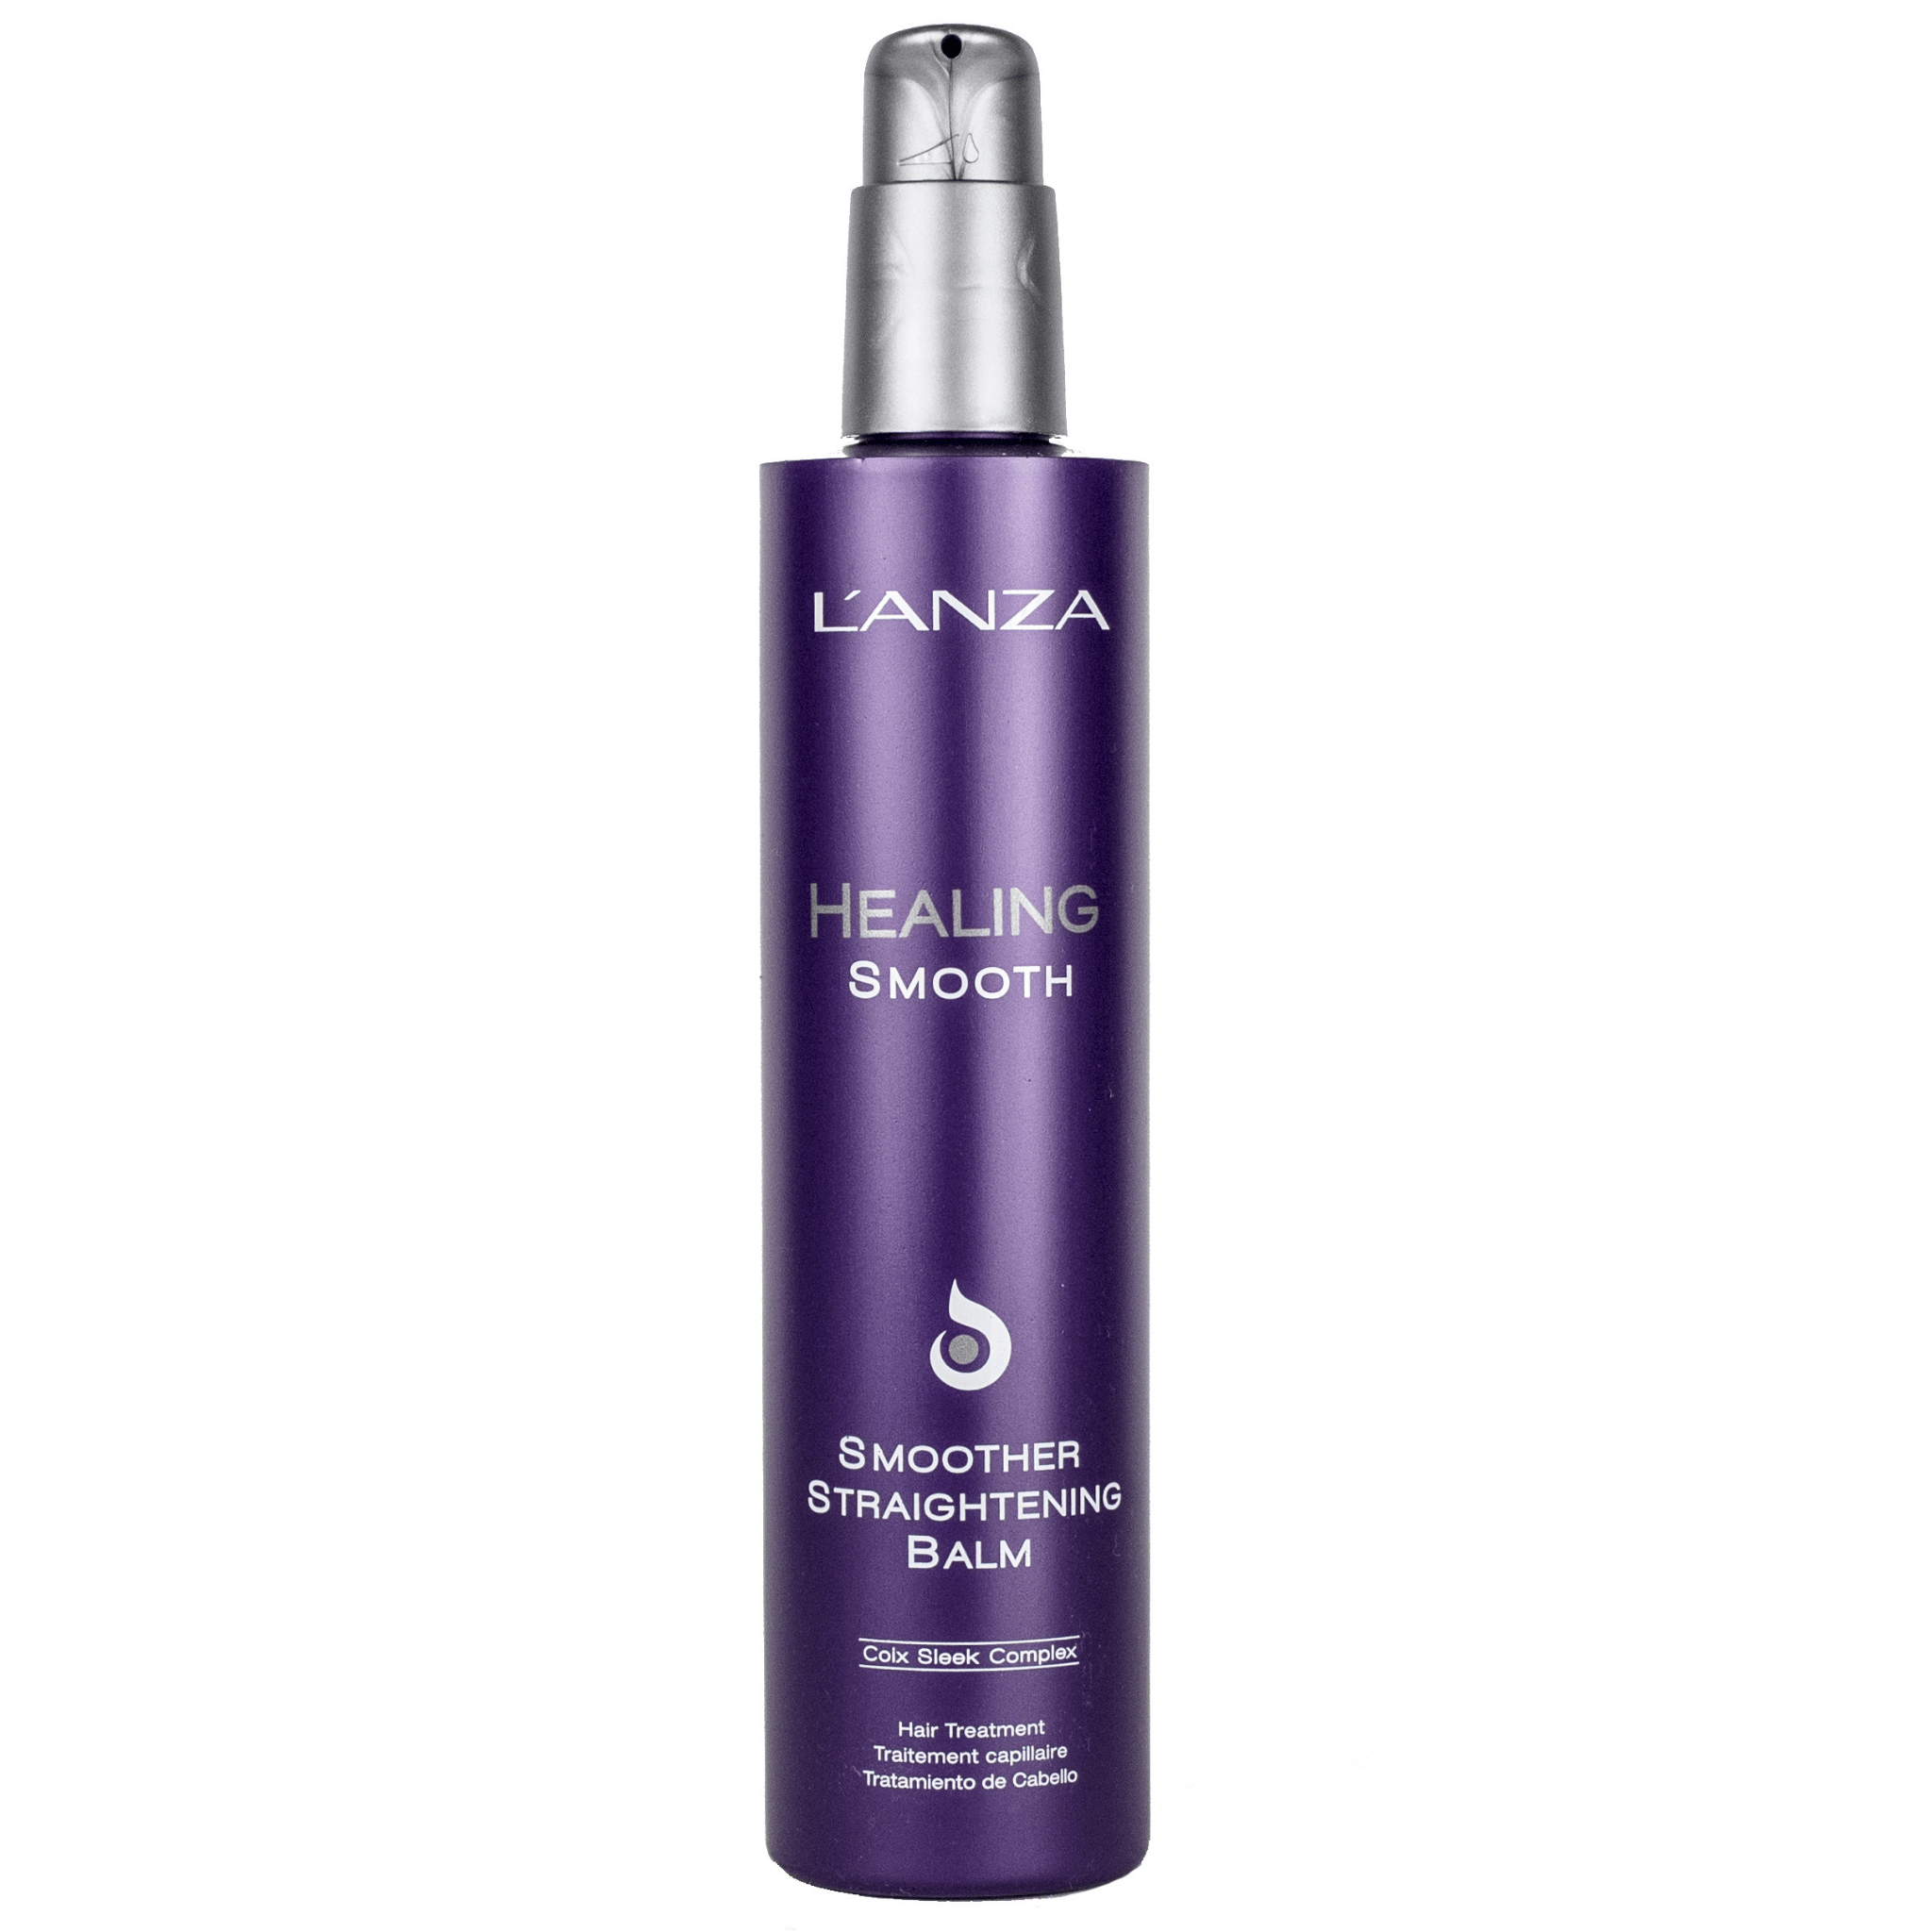 L'Anza. Healing Smooth Baume Lissant Smoother Straightening Balm - 250 ml - Concept C. Shop